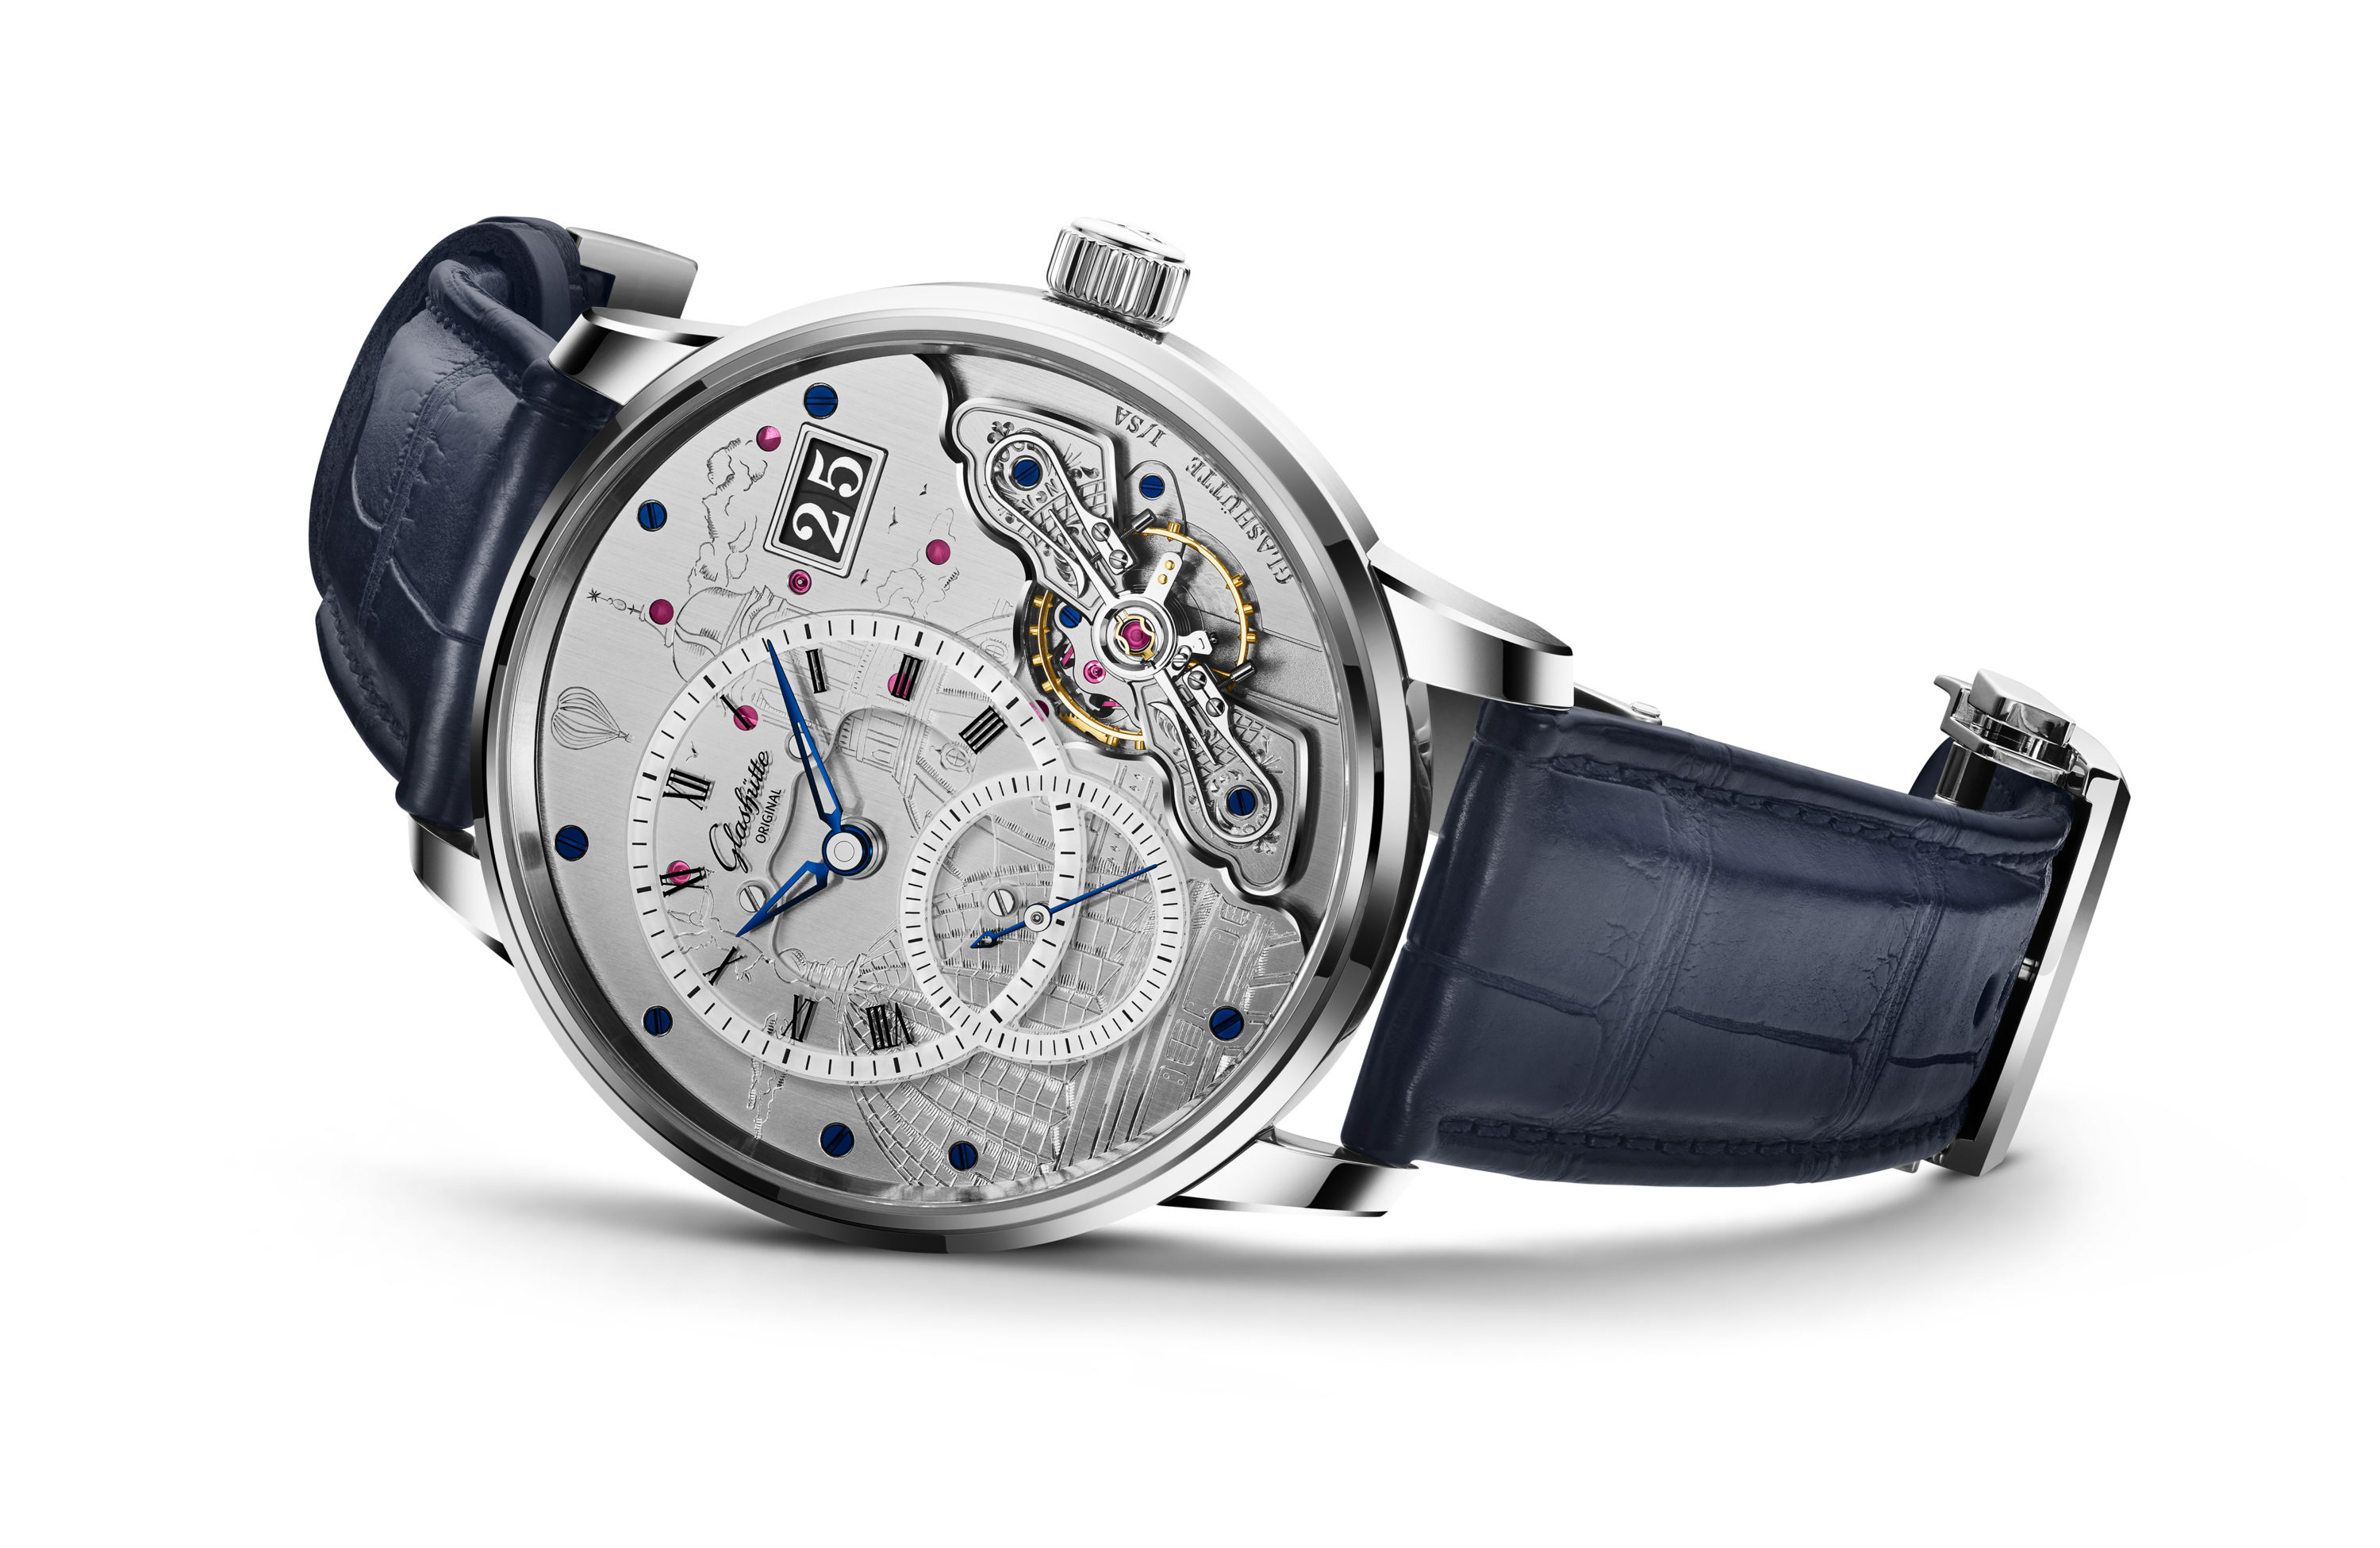 Citizen’s New Mechanical Caliber 0200 Fuses Swiss and Japanese Watchmaking Traditions